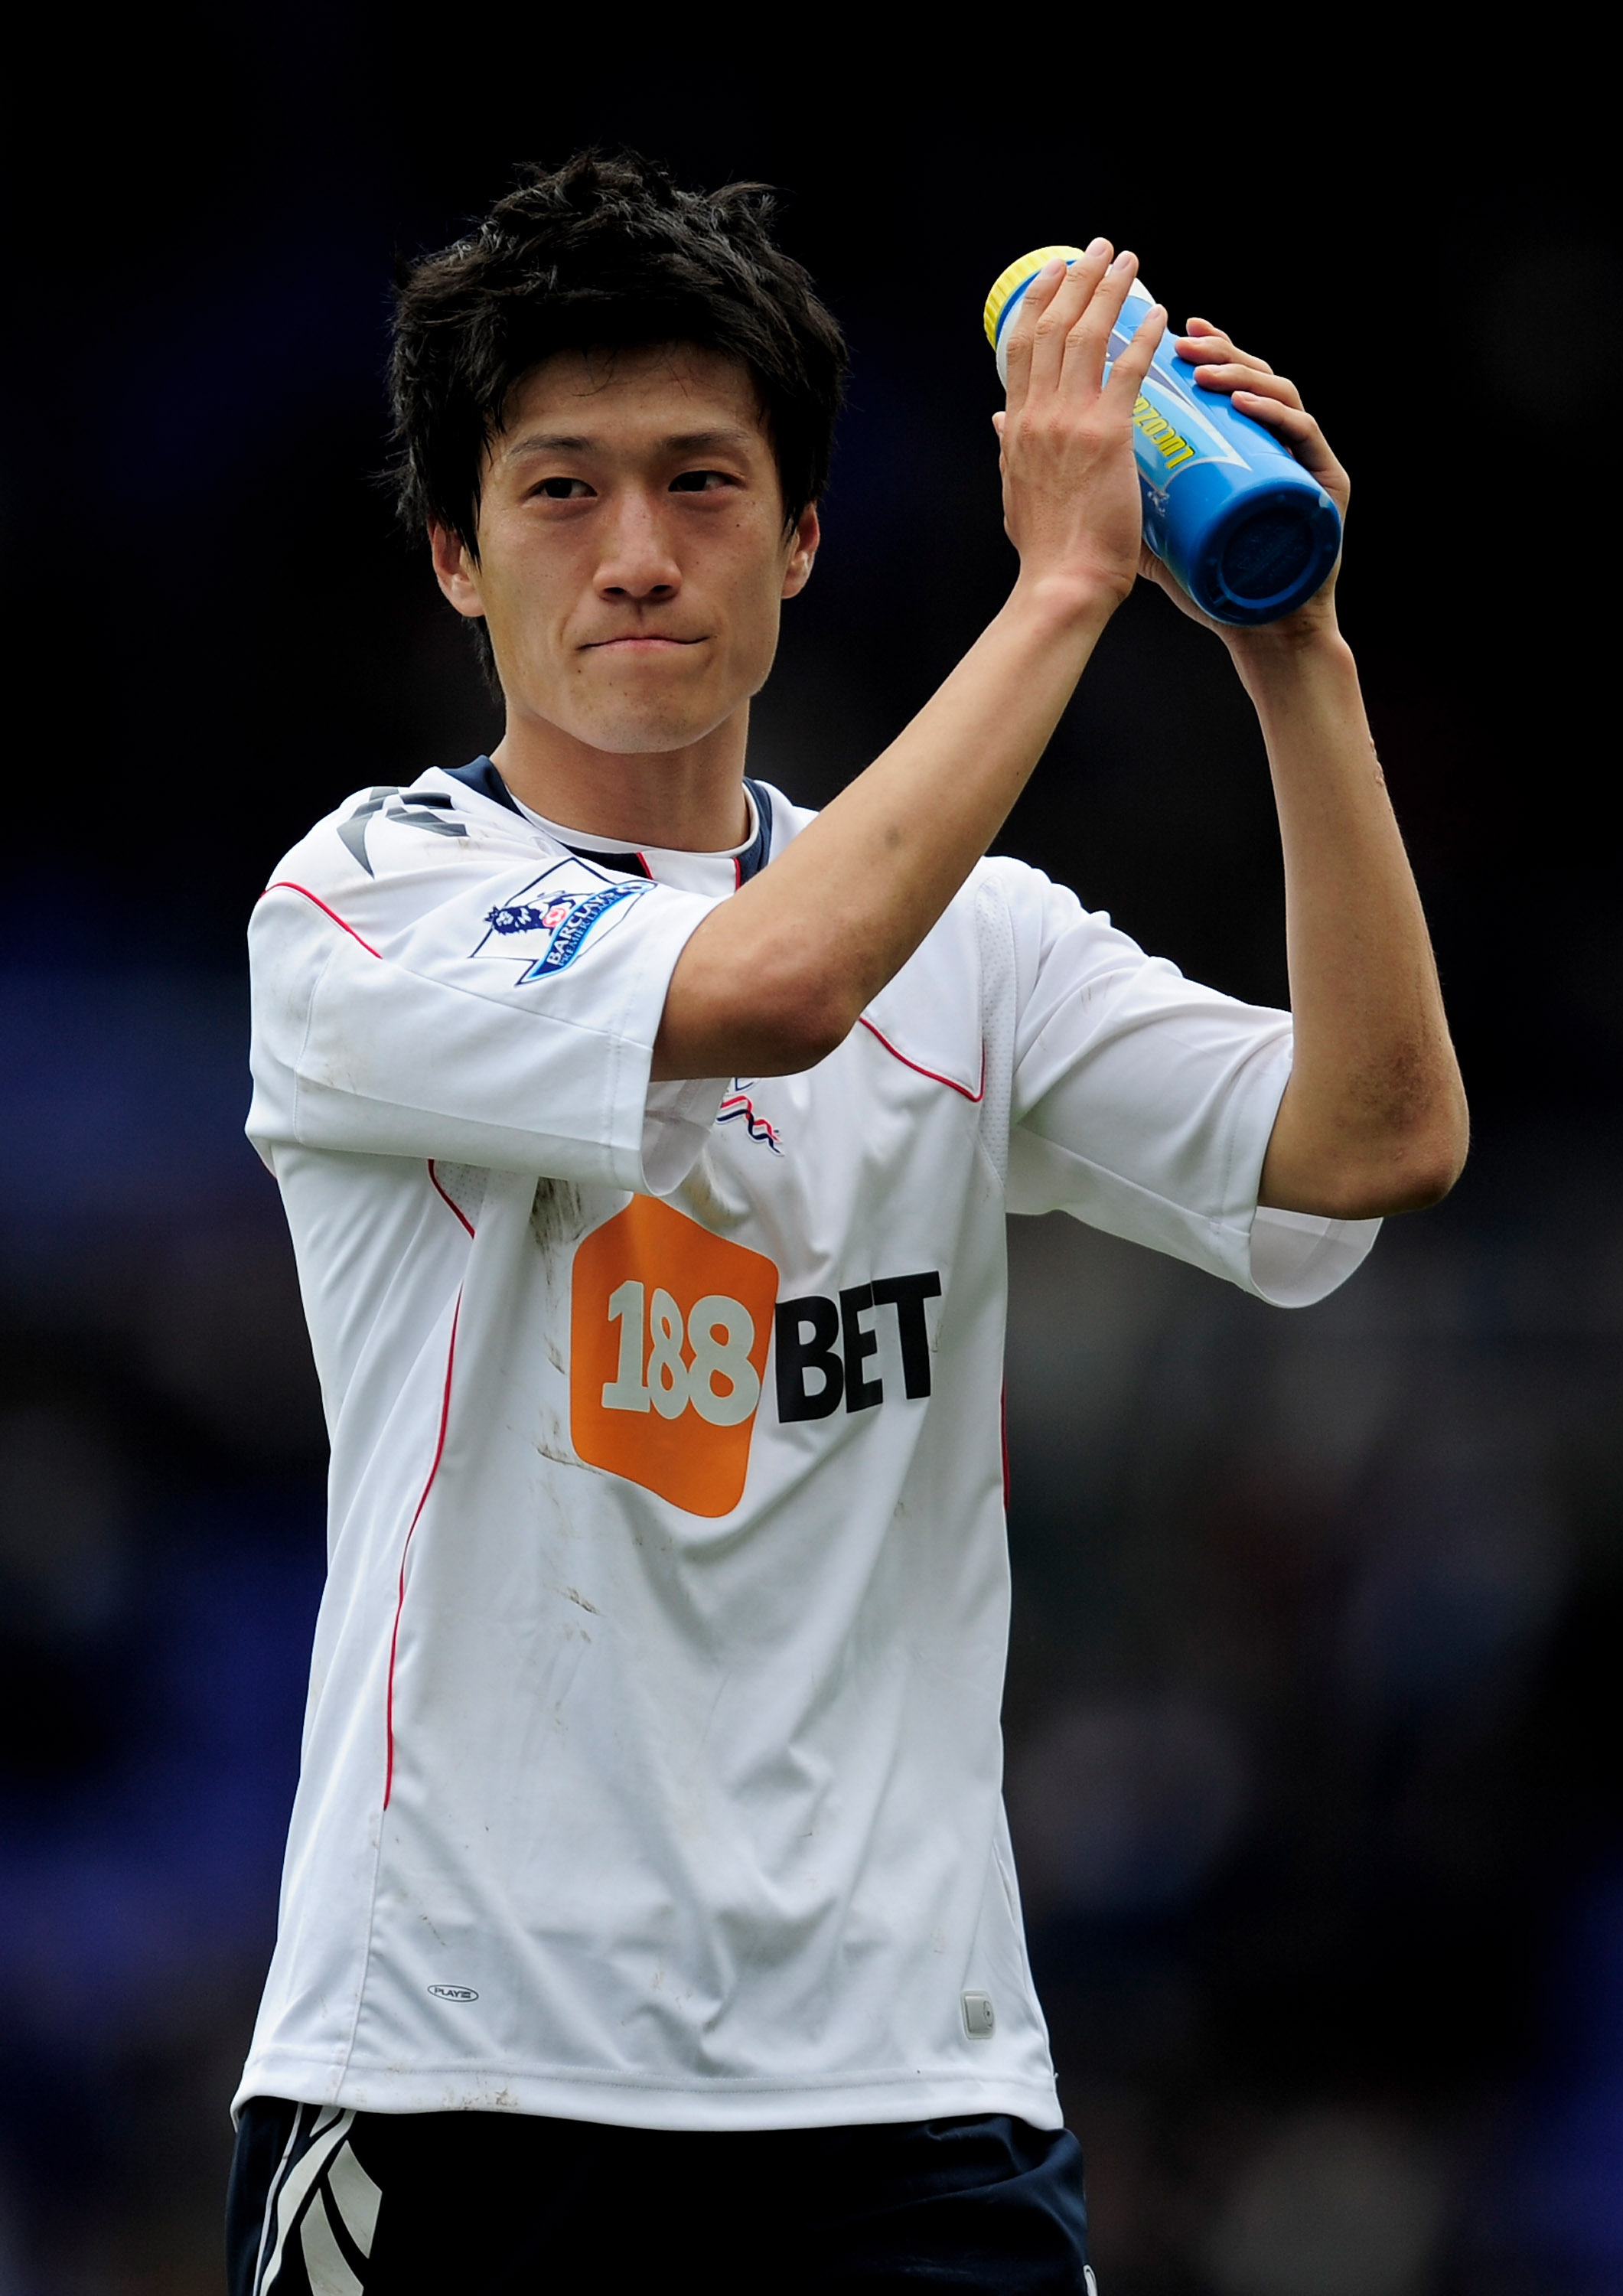 BIRMINGHAM, ENGLAND - MARCH 12: Chung-Yong Lee of Bolton Wanderers applauds the fans during the FA Cup sponsored by E.On Sixth Round match between Birmingham City and Bolton Wanderers at St Andrews on March 12, 2011 in Birmingham, England.  (Photo by Jami